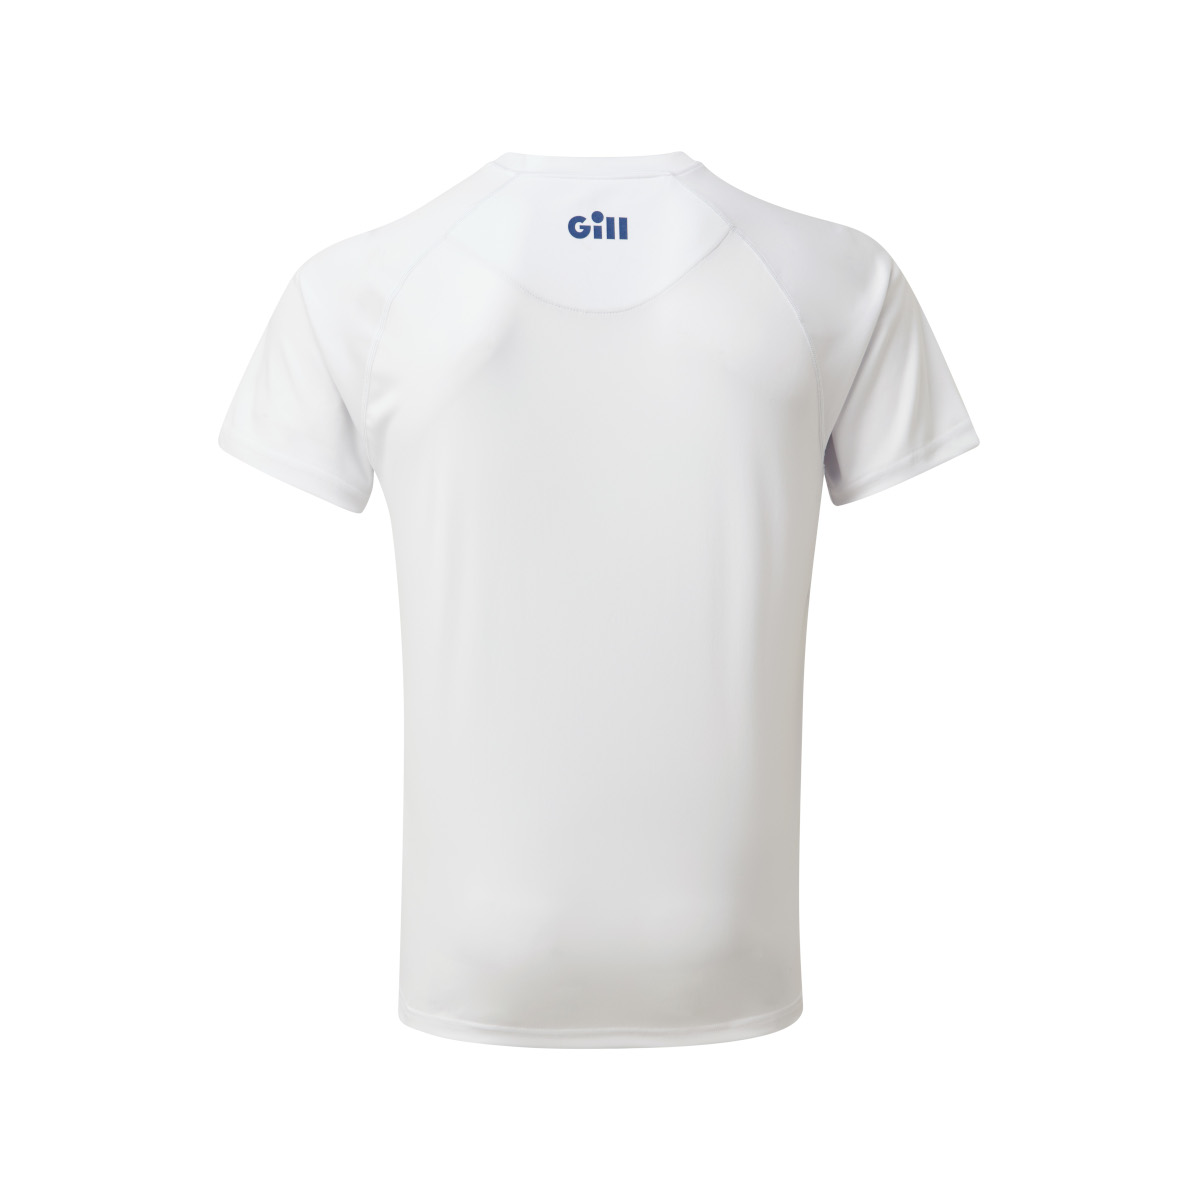 Gill Race t-shirt, homme - blanc, taille S